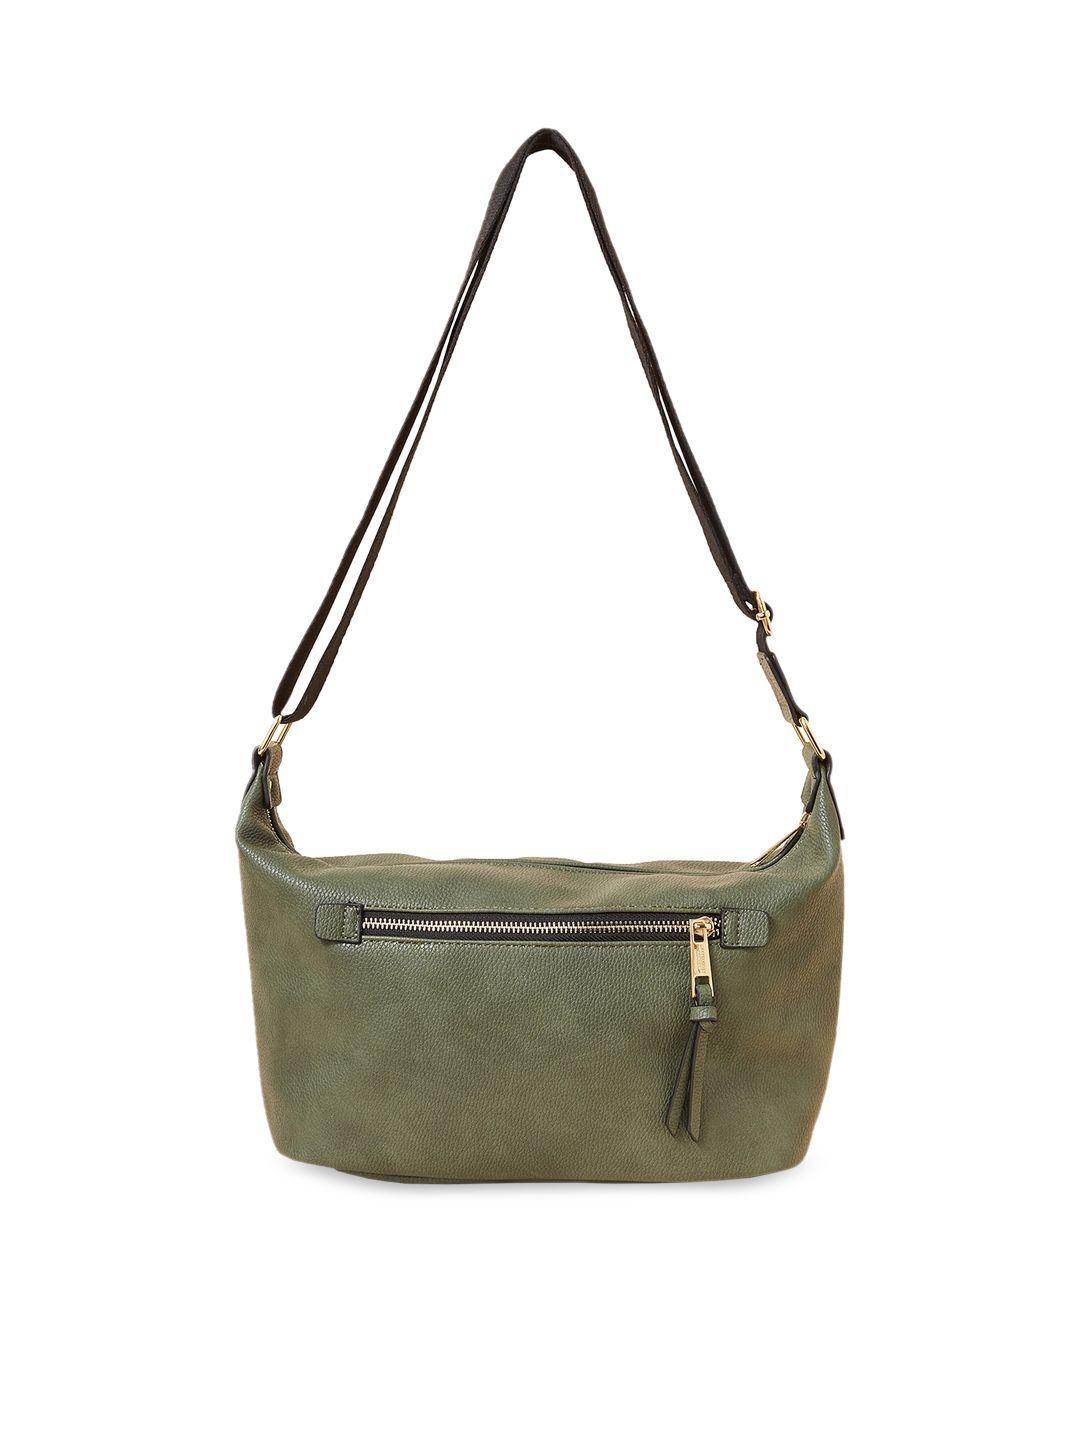 accessorize structured sling bag with tasselled